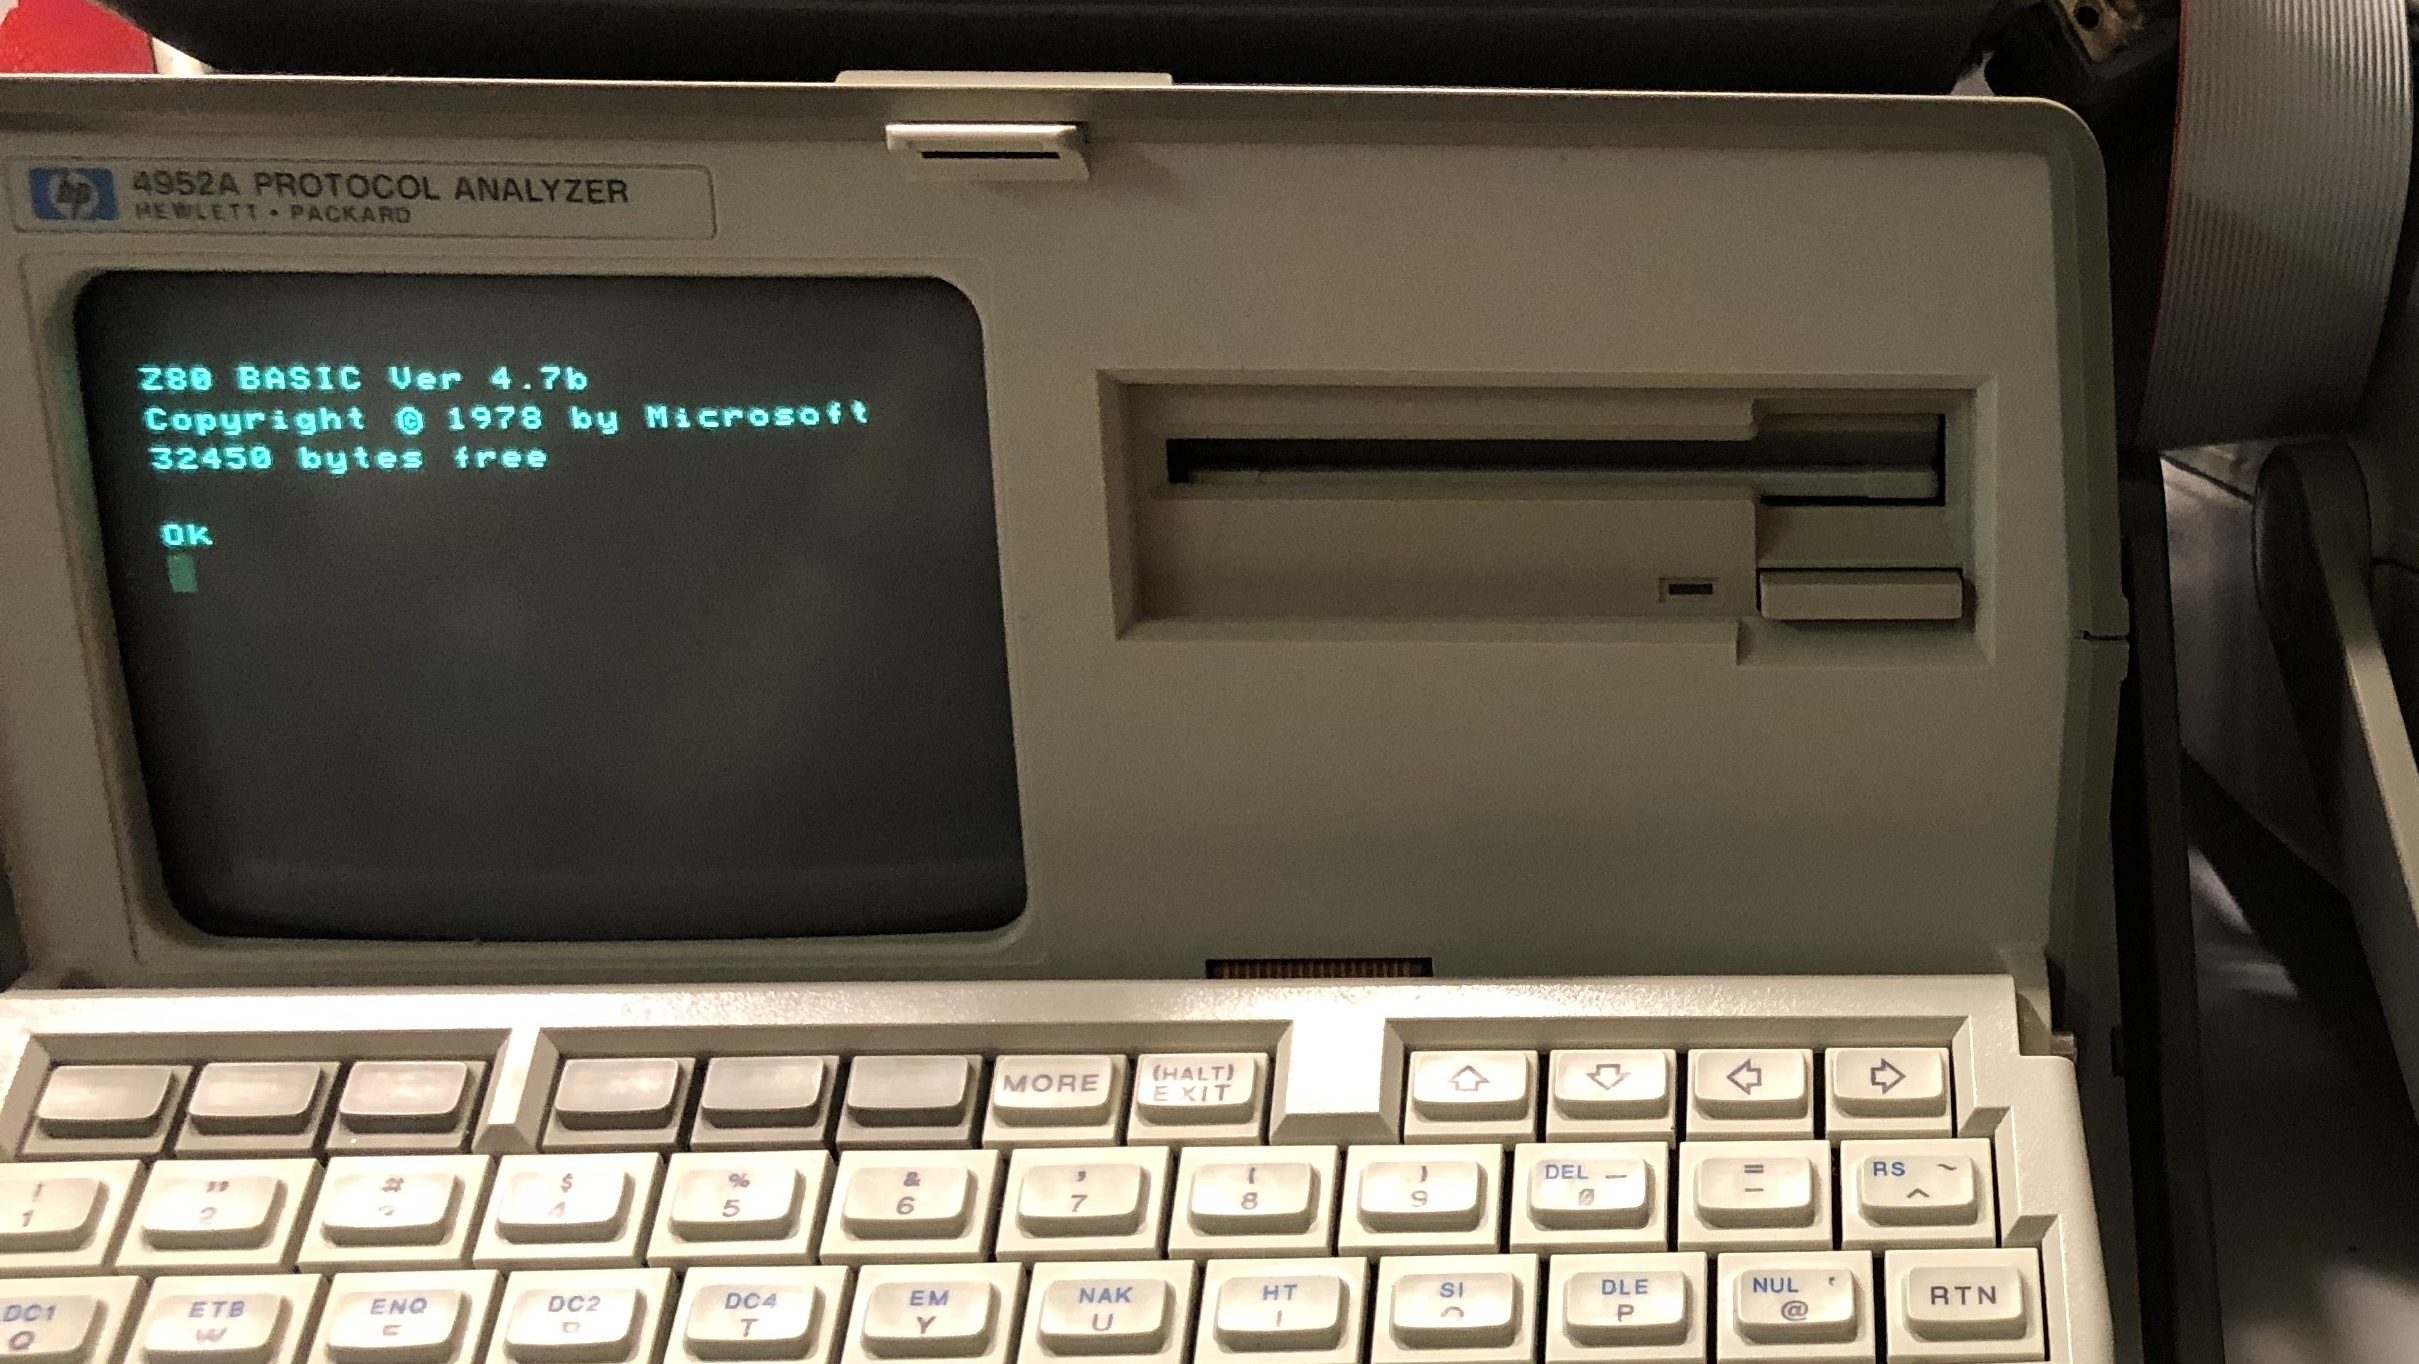 You can run BASIC on an old HP 4592 protocol analyzer